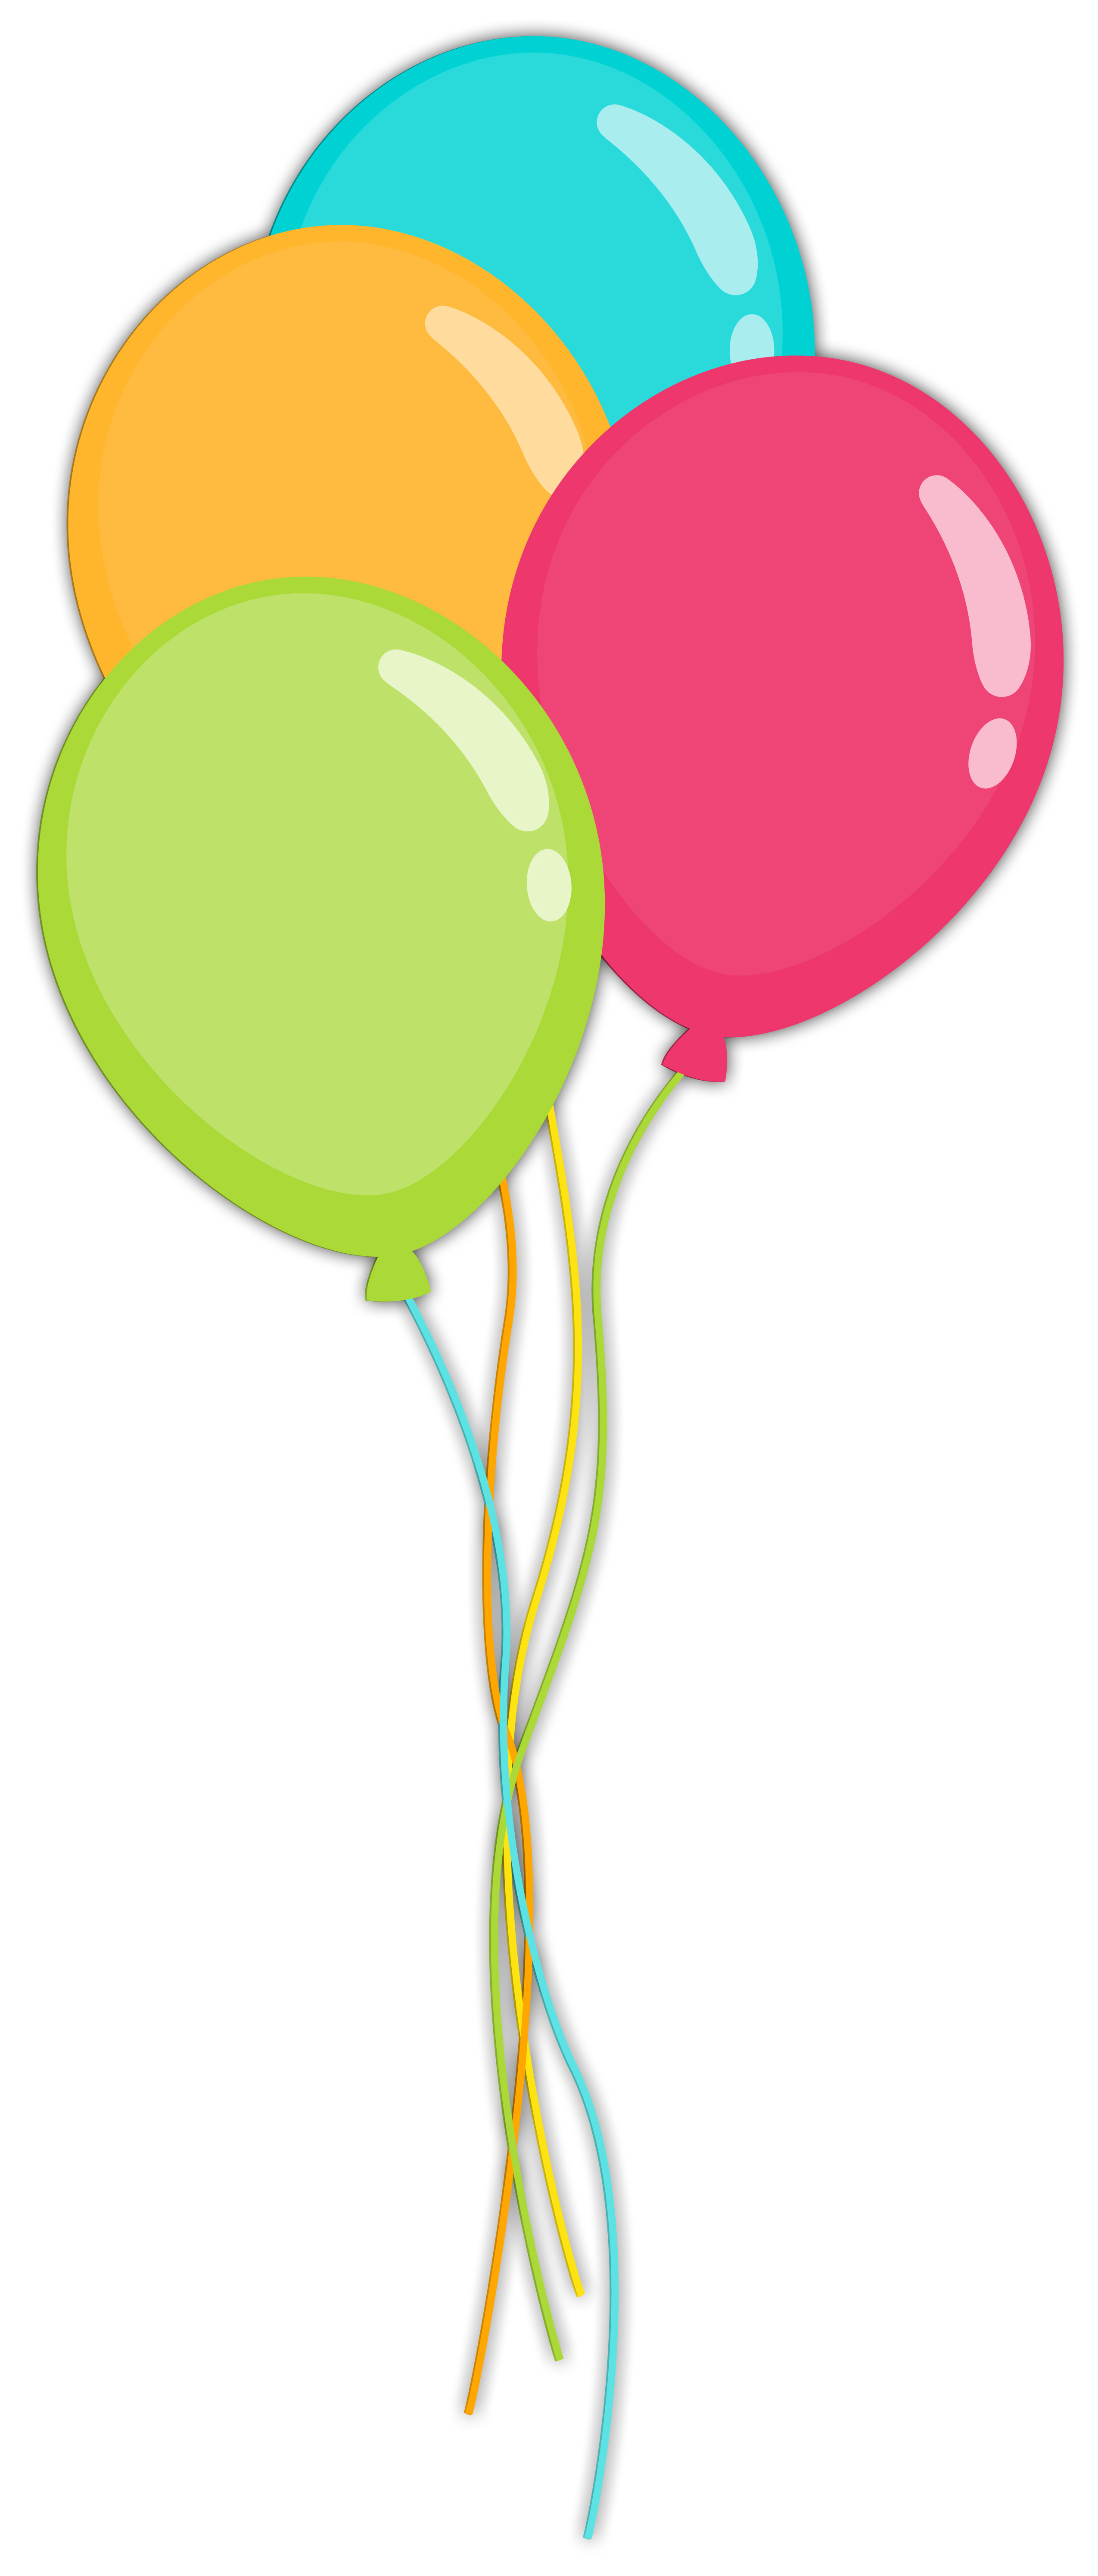 Party Balloons Clipart